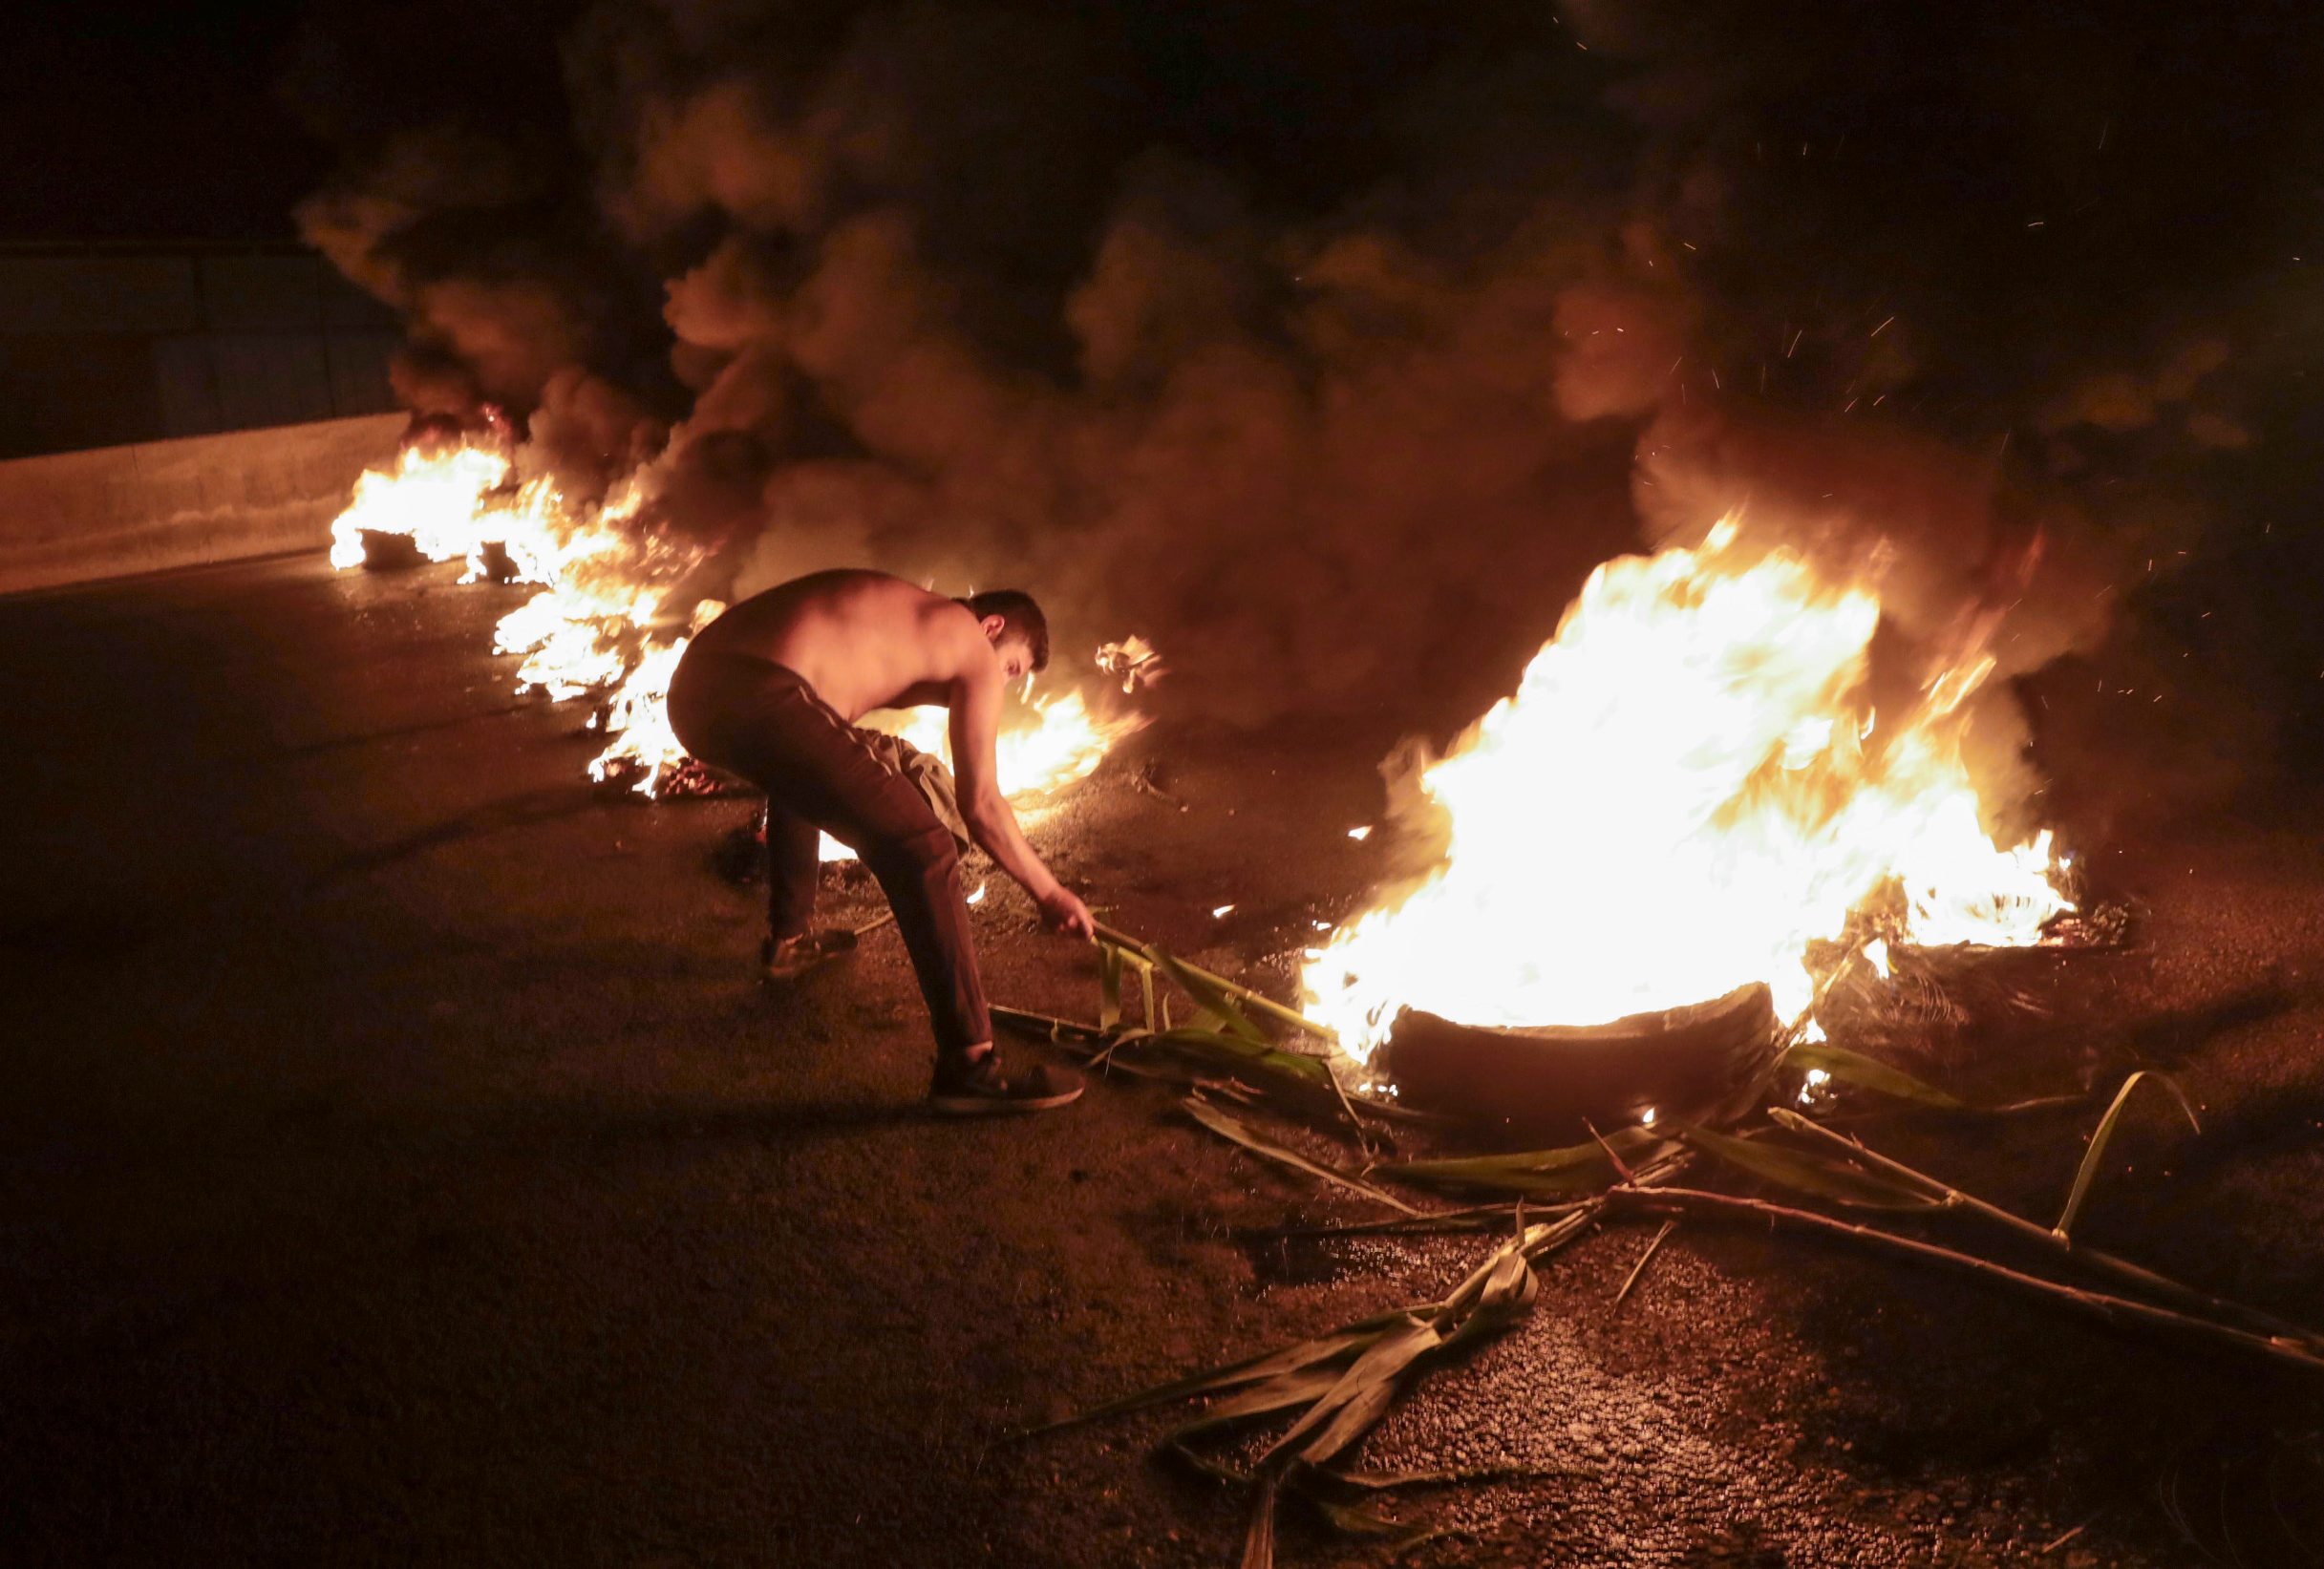 A Lebanese anti-government protester burns tyres to block the coastal highway north in the Dbayeh area, north of the capital Beirut, early on April 27, 2020, to protest the deteriorating economic situation. - Lebanon's worst economic crisis since the 1975-1990 civil war is now compounded by the coronavirus lockdown and nighttime curfew. Still, protesters have staged several daytime demonstrations recently, in continuation of a nationwide protest which erupted in October last year. (Photo by ANWAR AMRO / AFP)